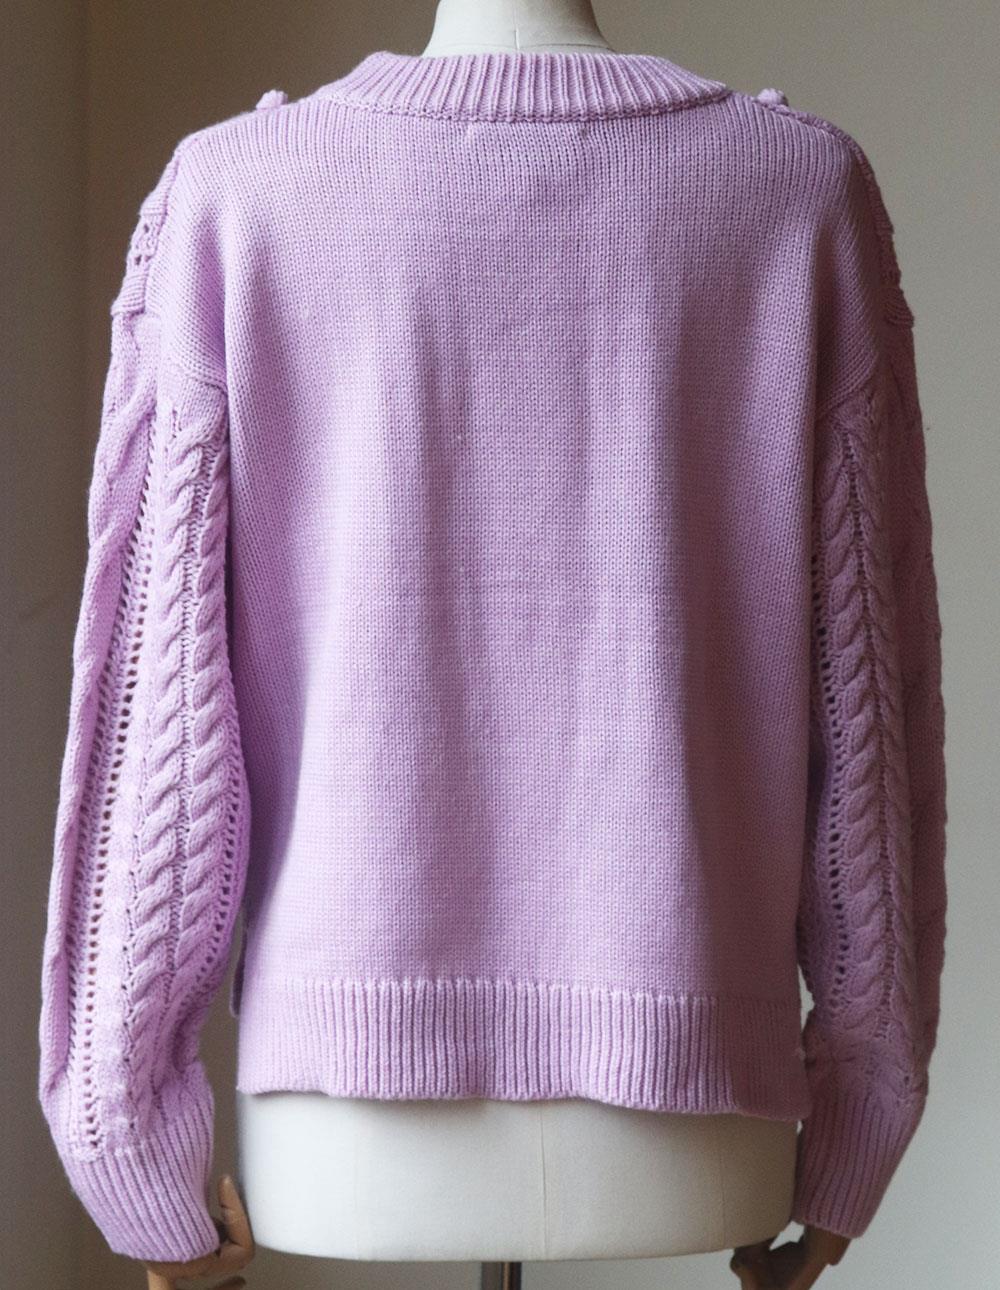 HEARTLOOM CABLE KNITTED SWEATER MEDIUM